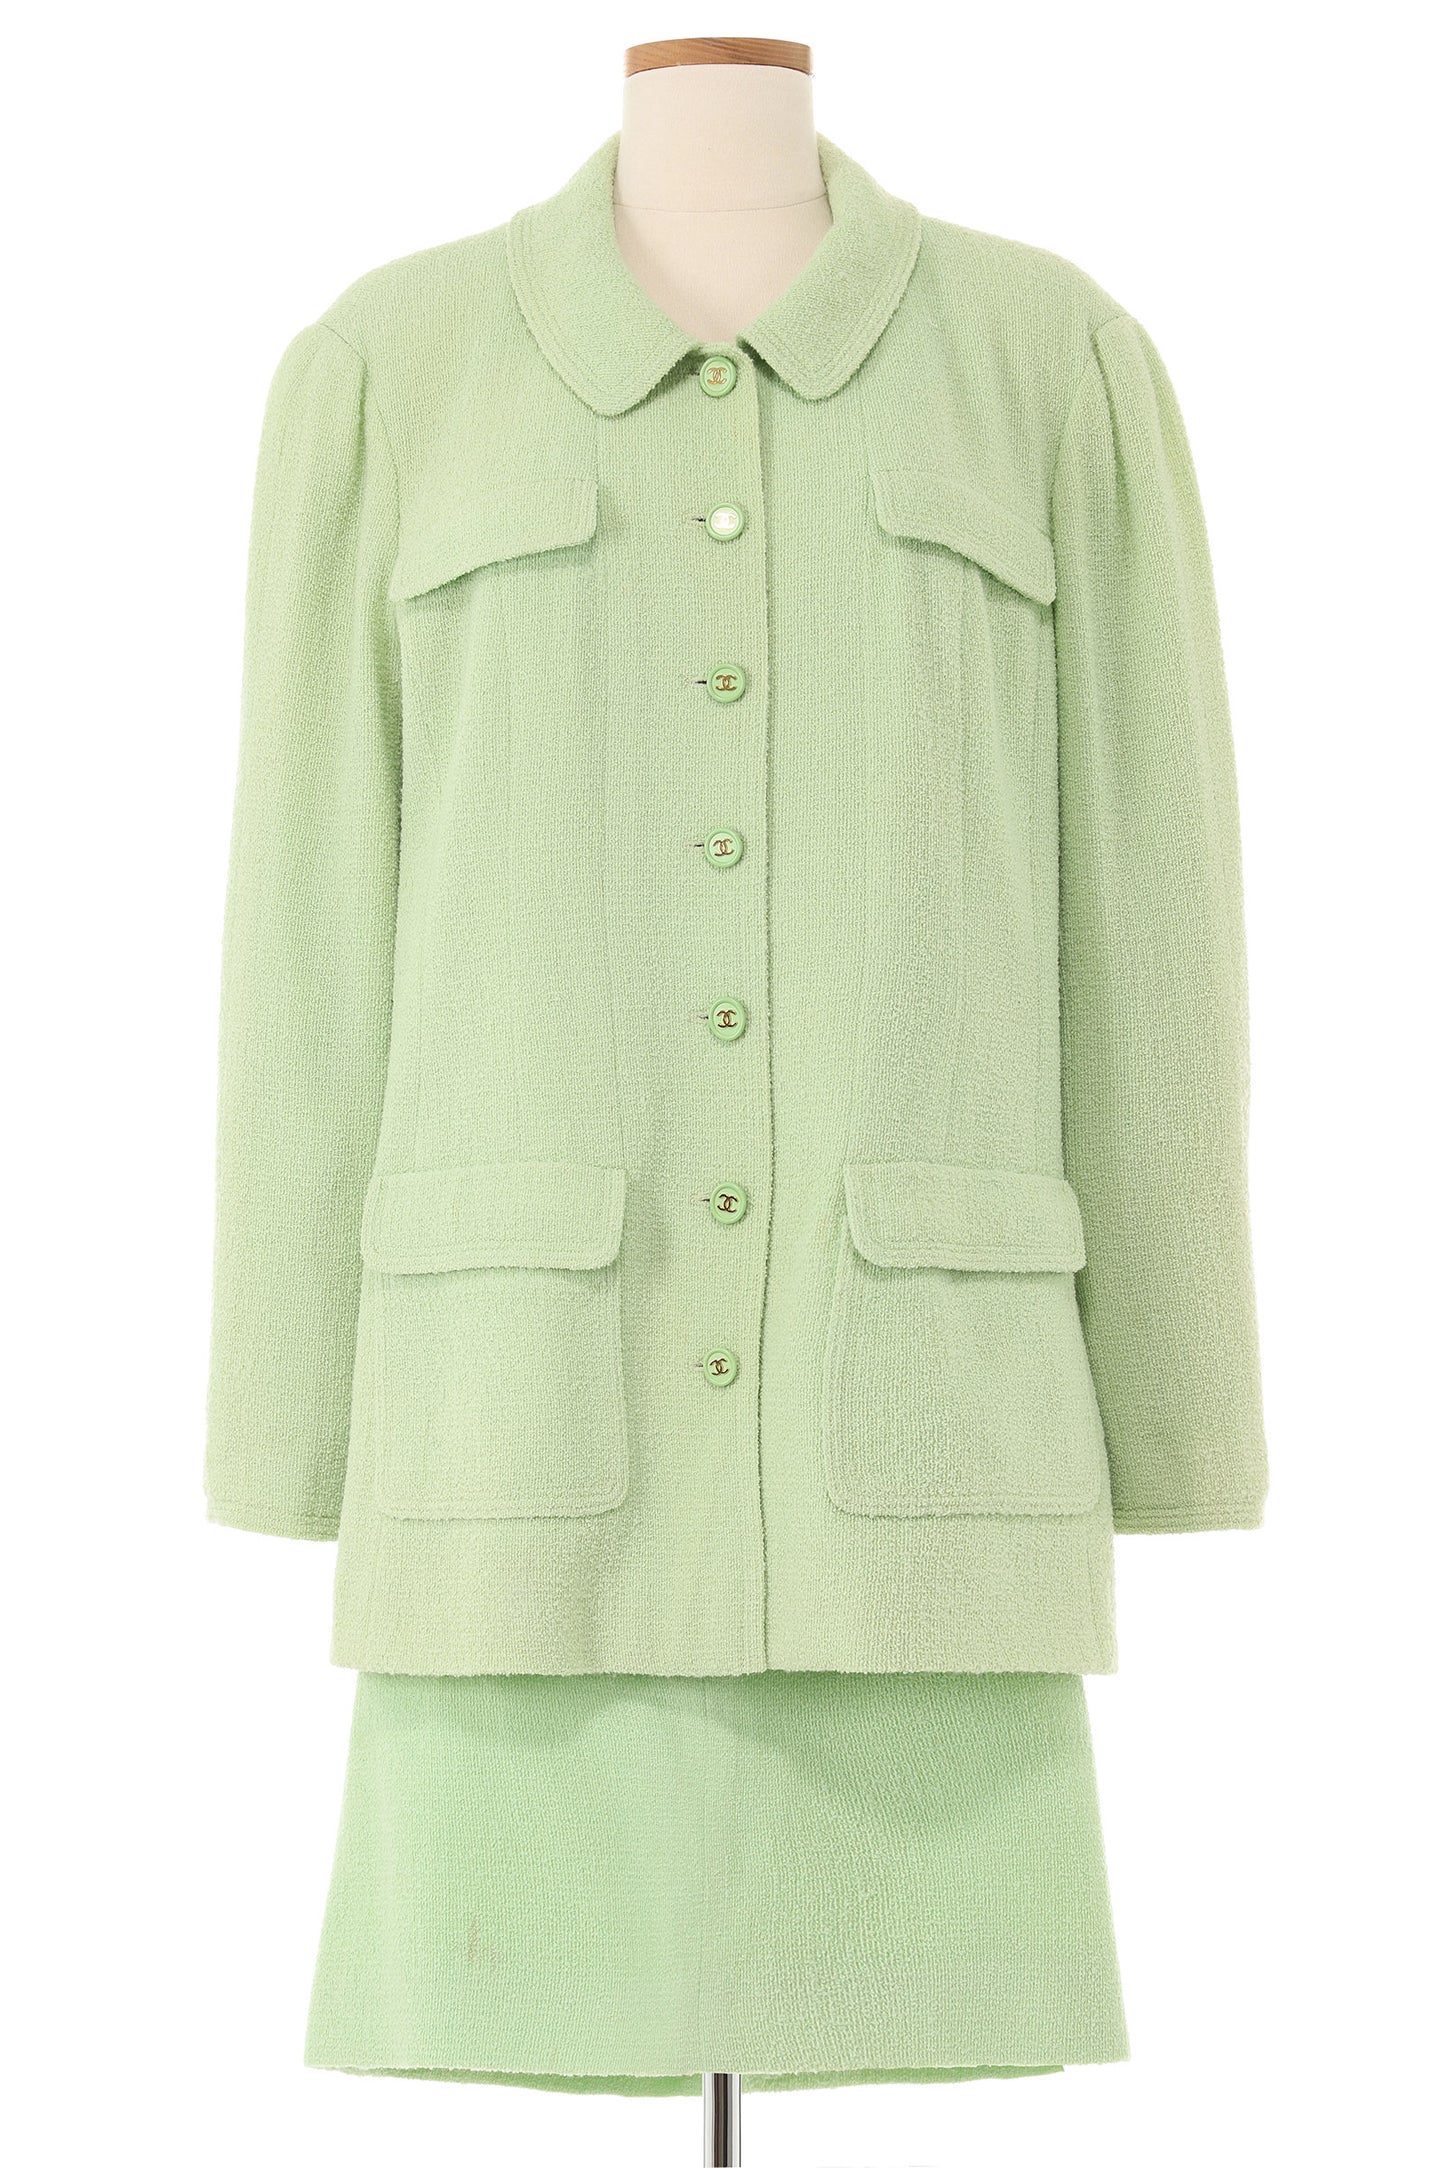 Chanel 1997 Green Tweed Skirt Suit With Green Chanel Buttons